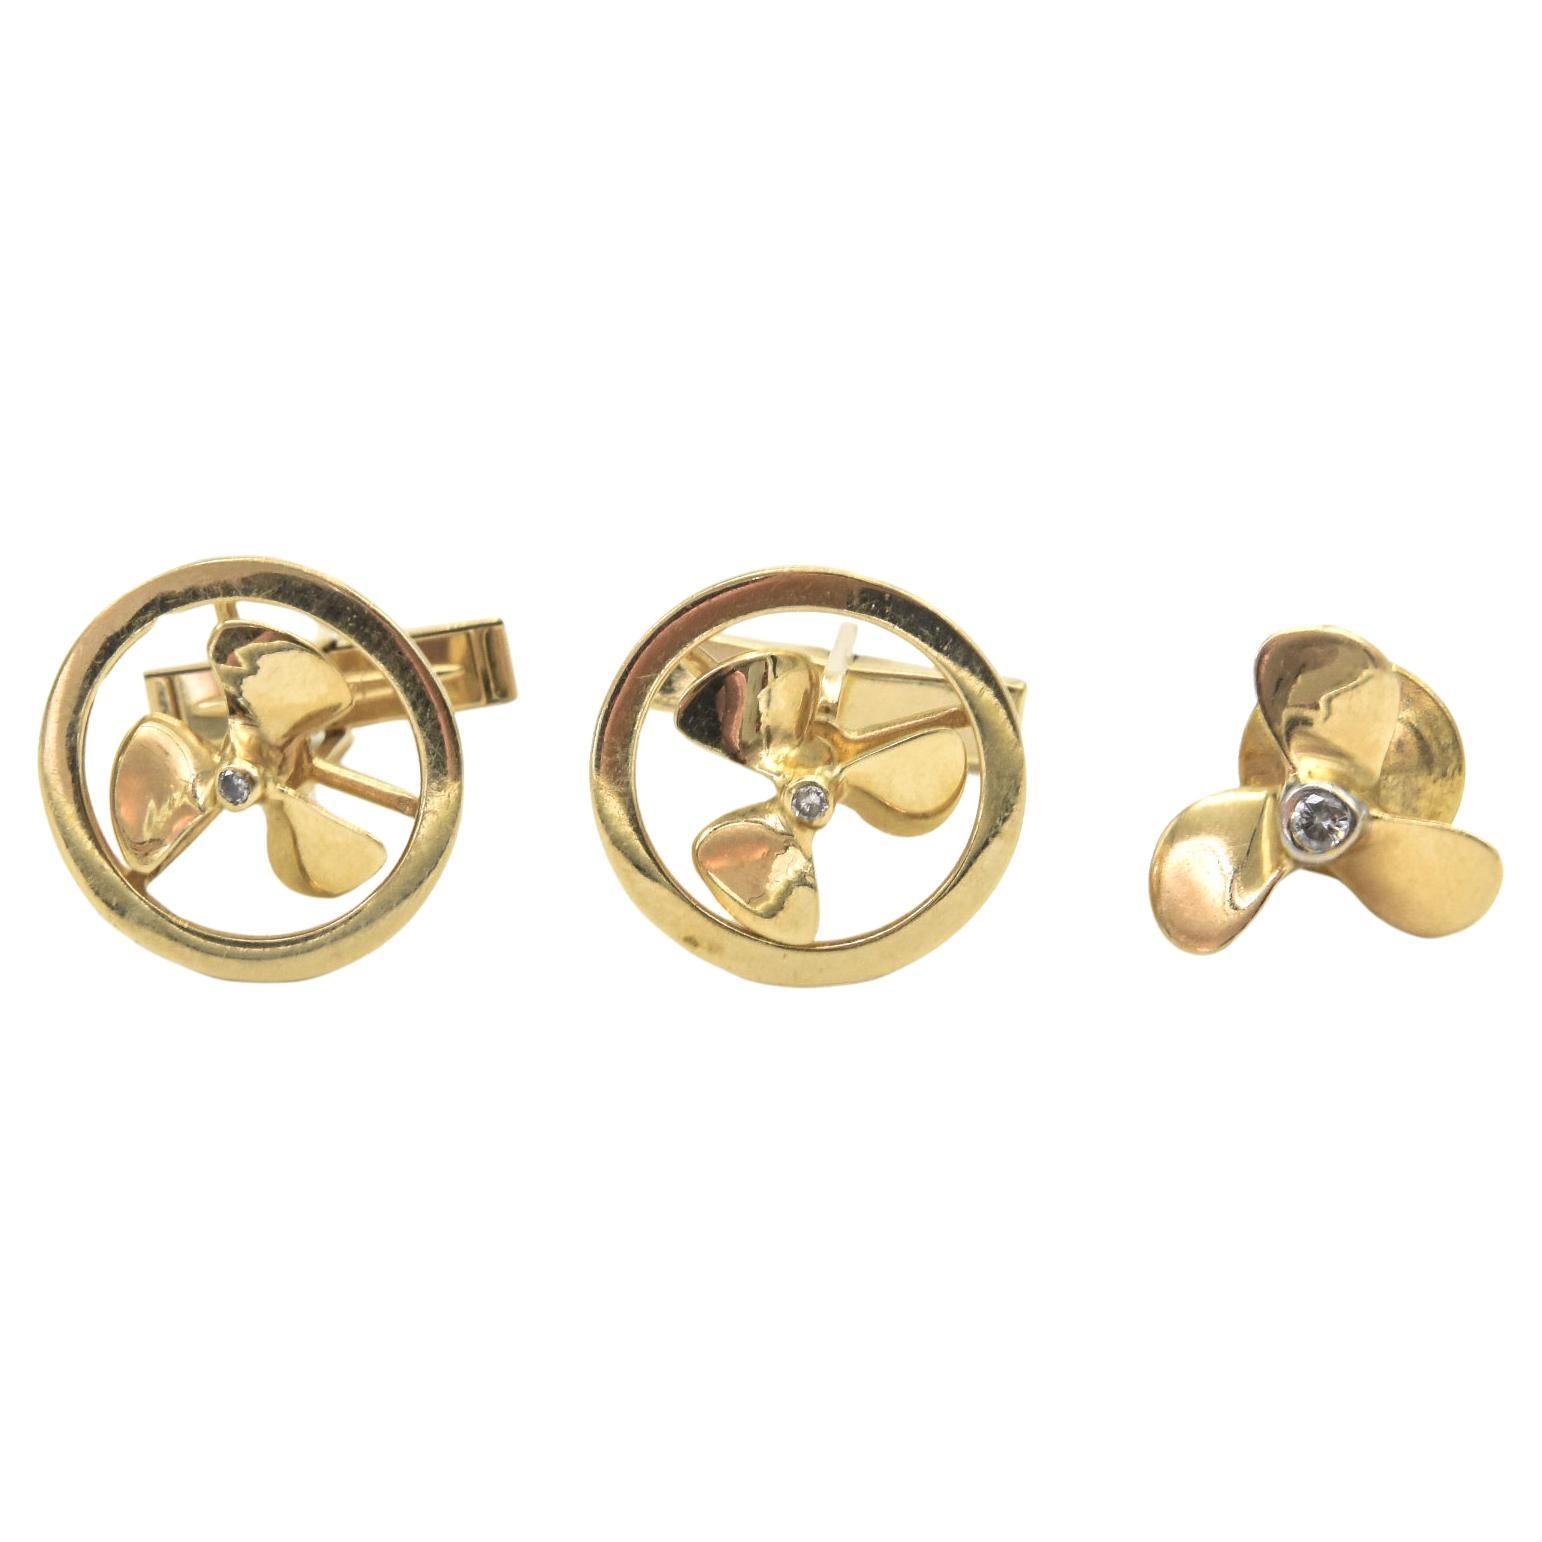 Pair of 14k yellow gold mechanical propeller cufflinks accented with a bezel set diamond in the center.  The propellers on the cufflinks spin.  The cufflinks are easy to put on with a simply 